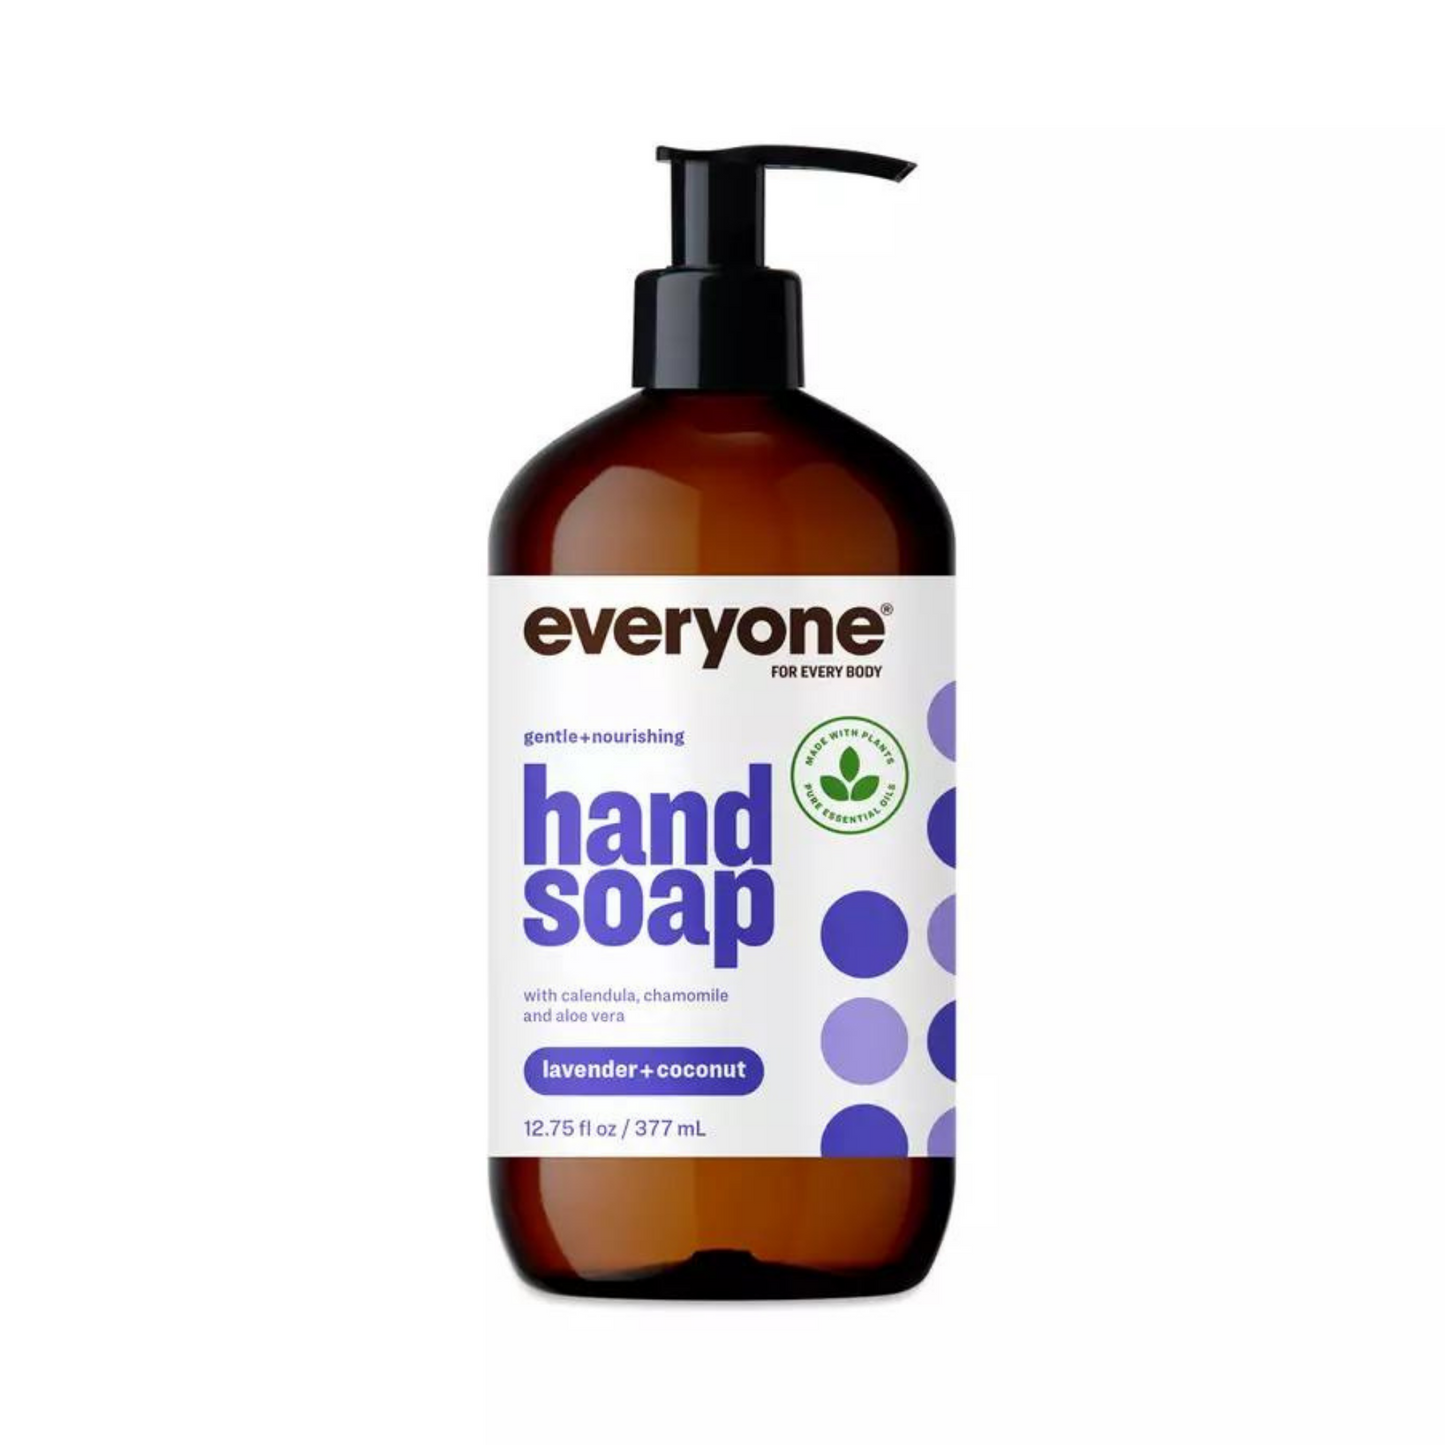 Primary image of Everyone Lavender + Coconut Hand Soap